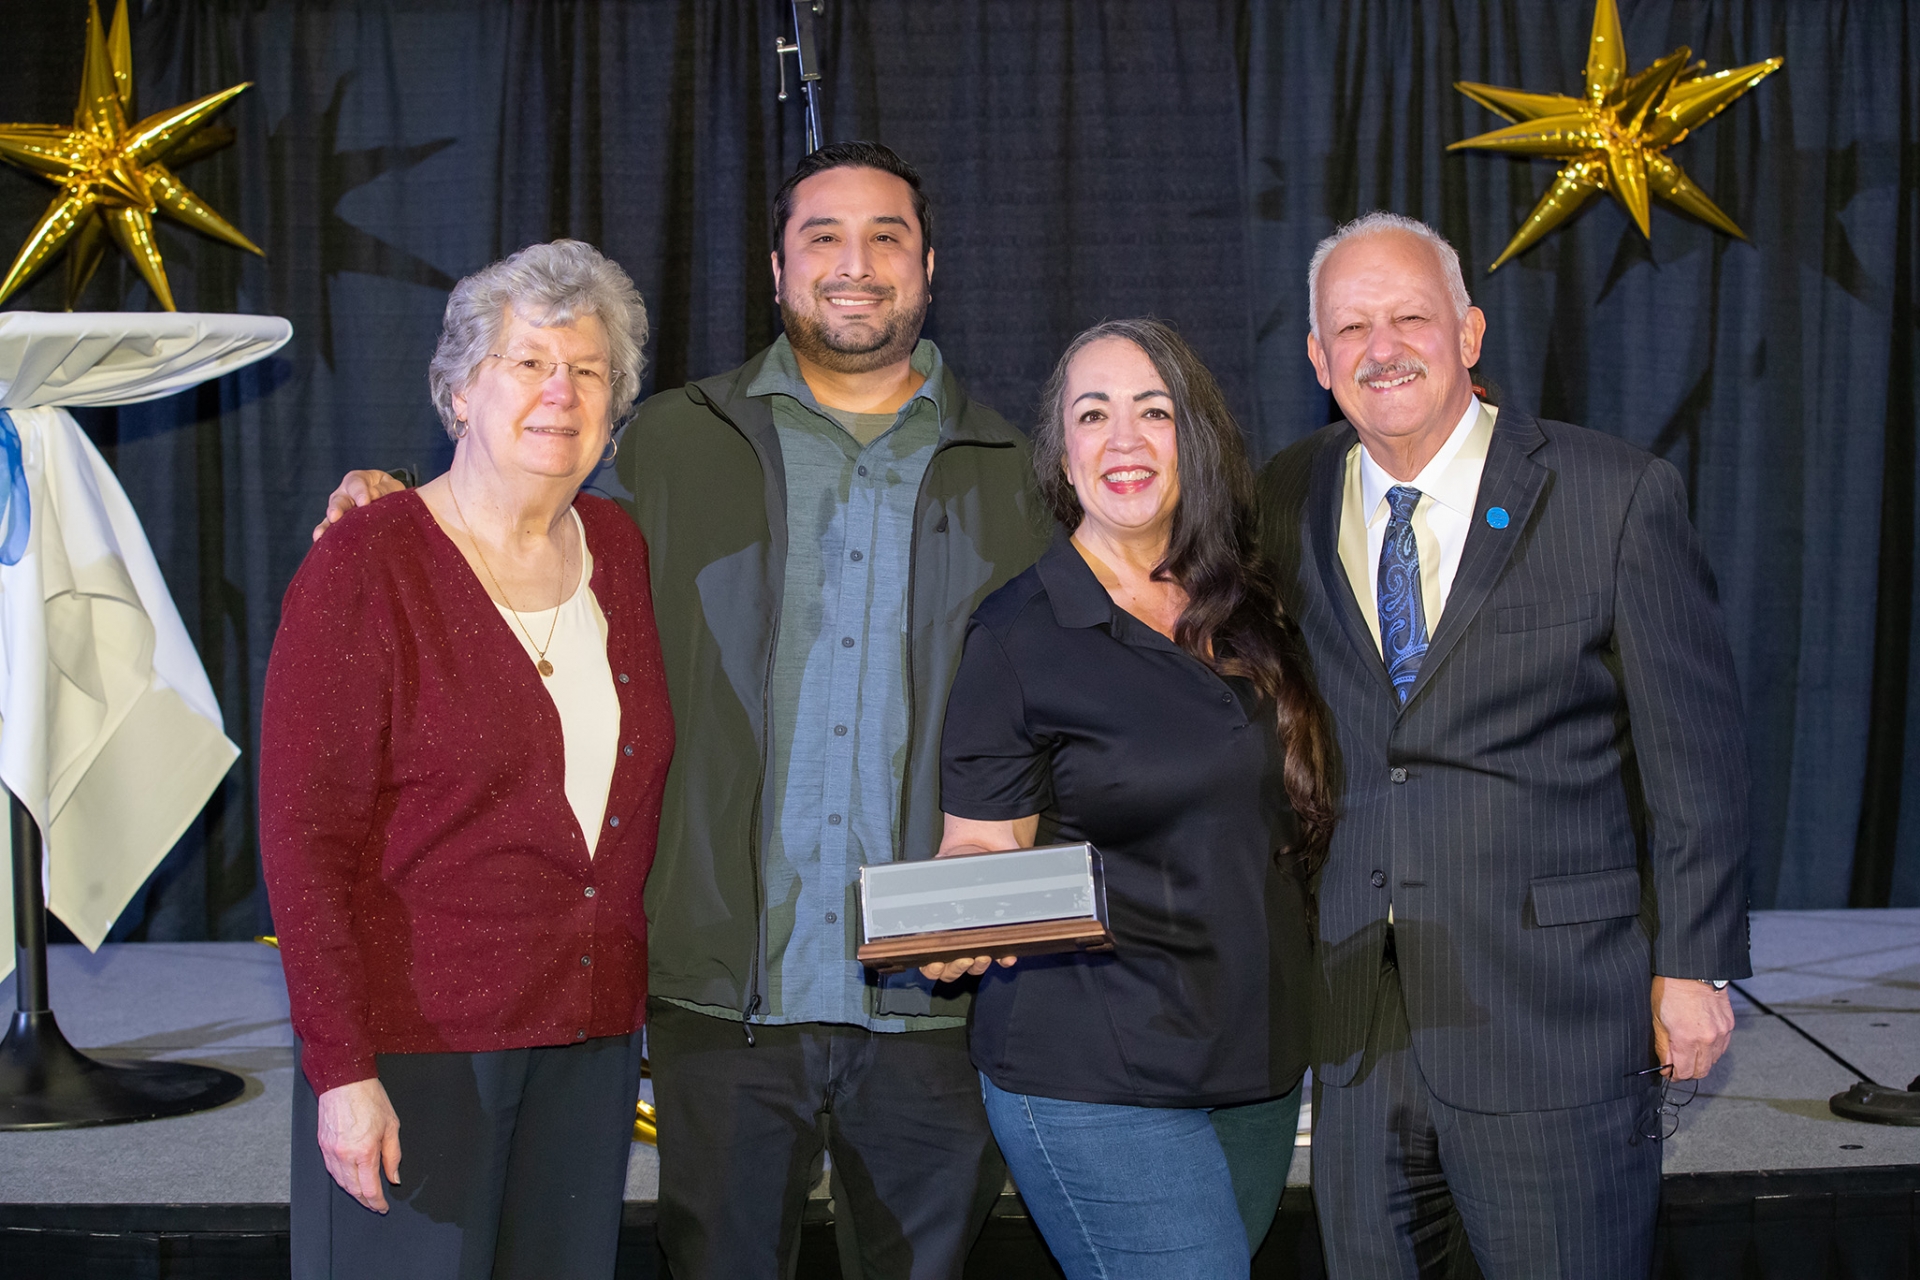 Pictured Carrie Hartung, widow of Augie Hartung, Jaime Espinoza, chair of the Staff Council Executive Board, Lisa Gordon, recipient of the Augie and CSUSB President Tomás D. Morales. 